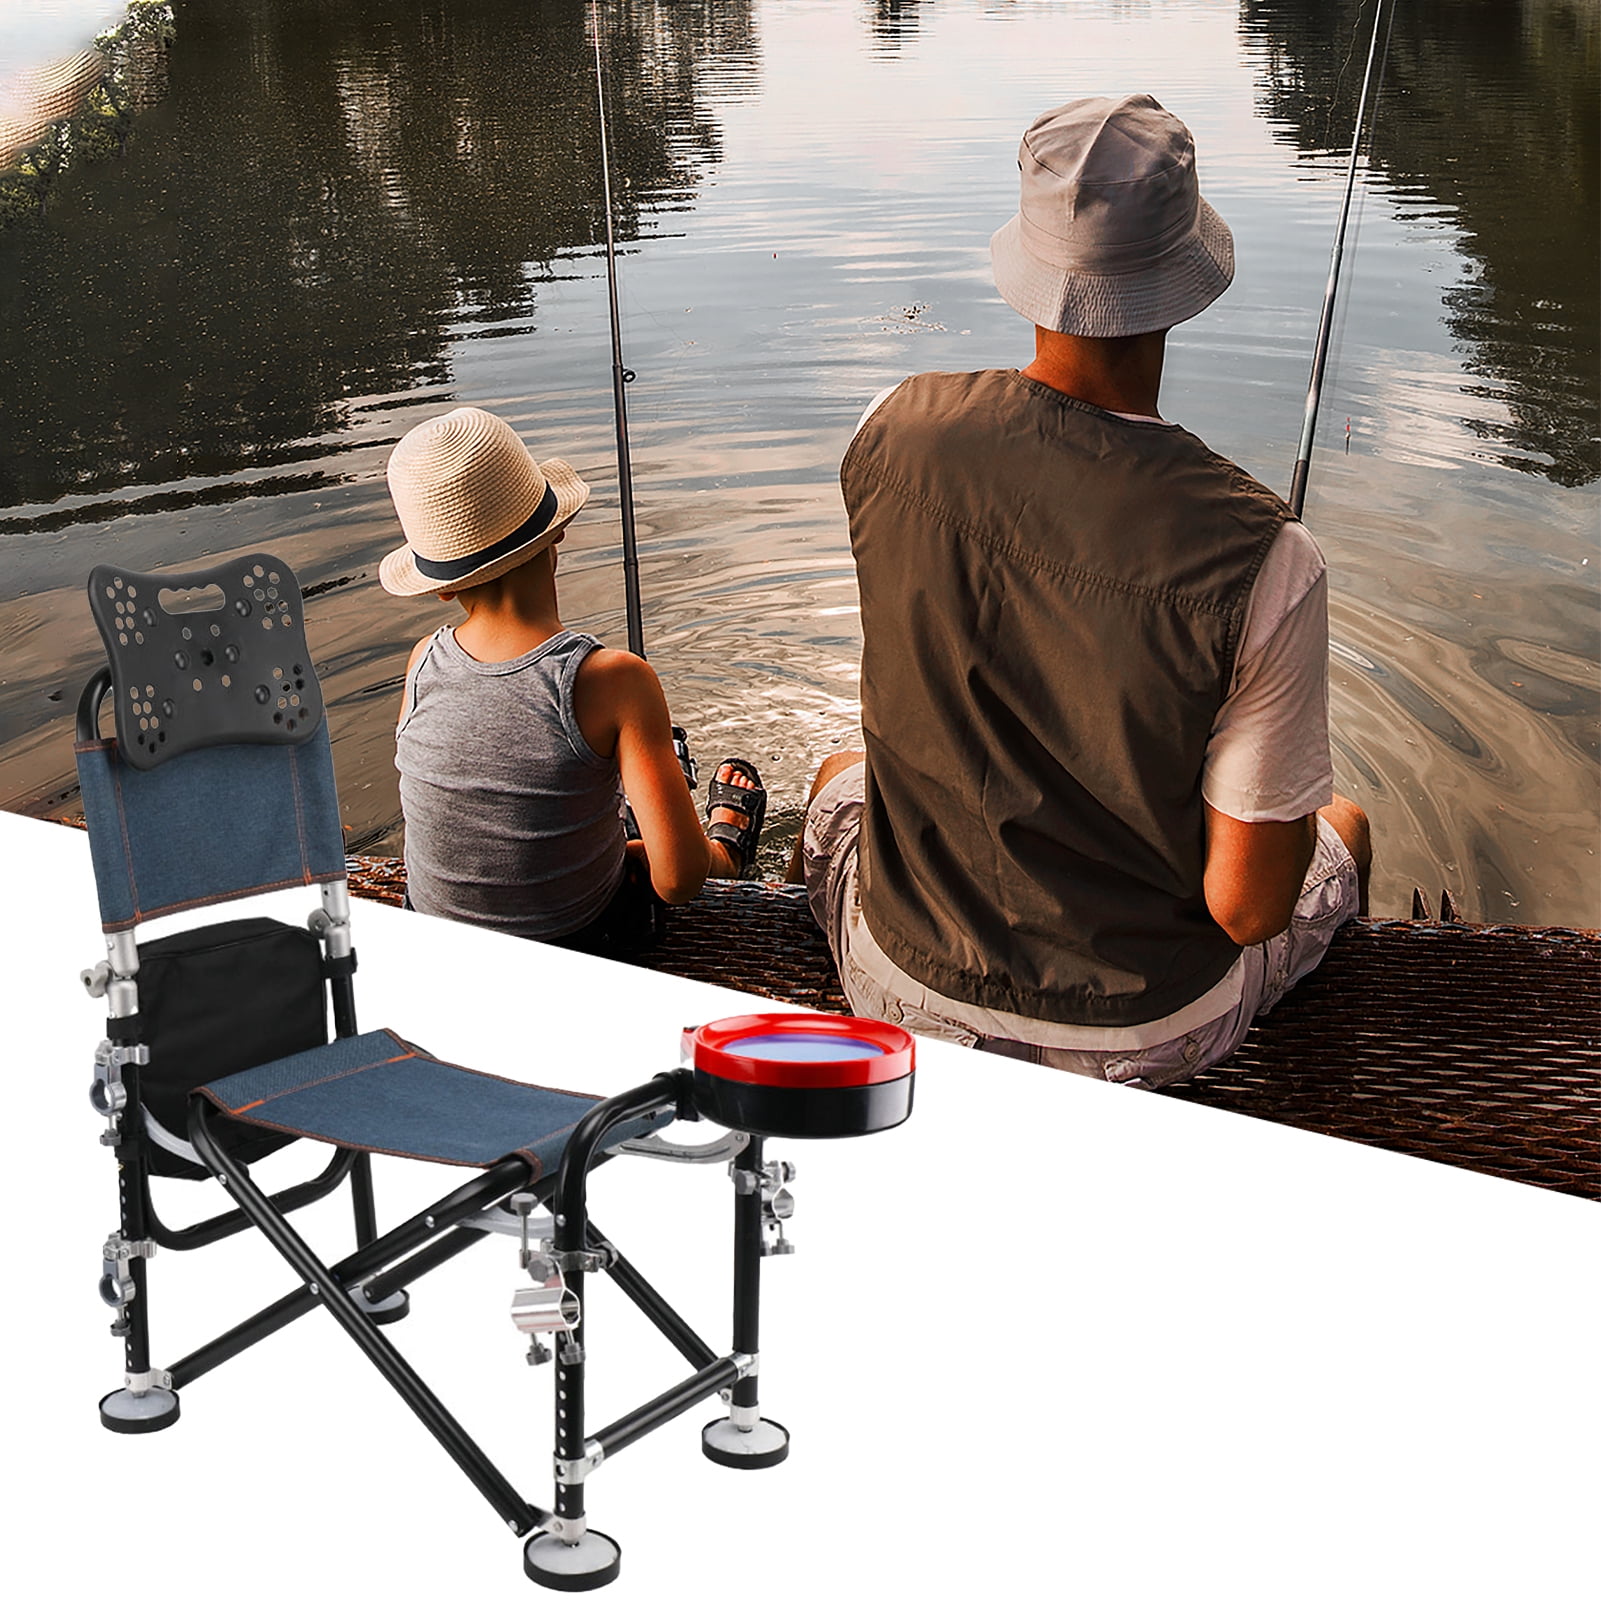 Fishing chair backrest with rod holder